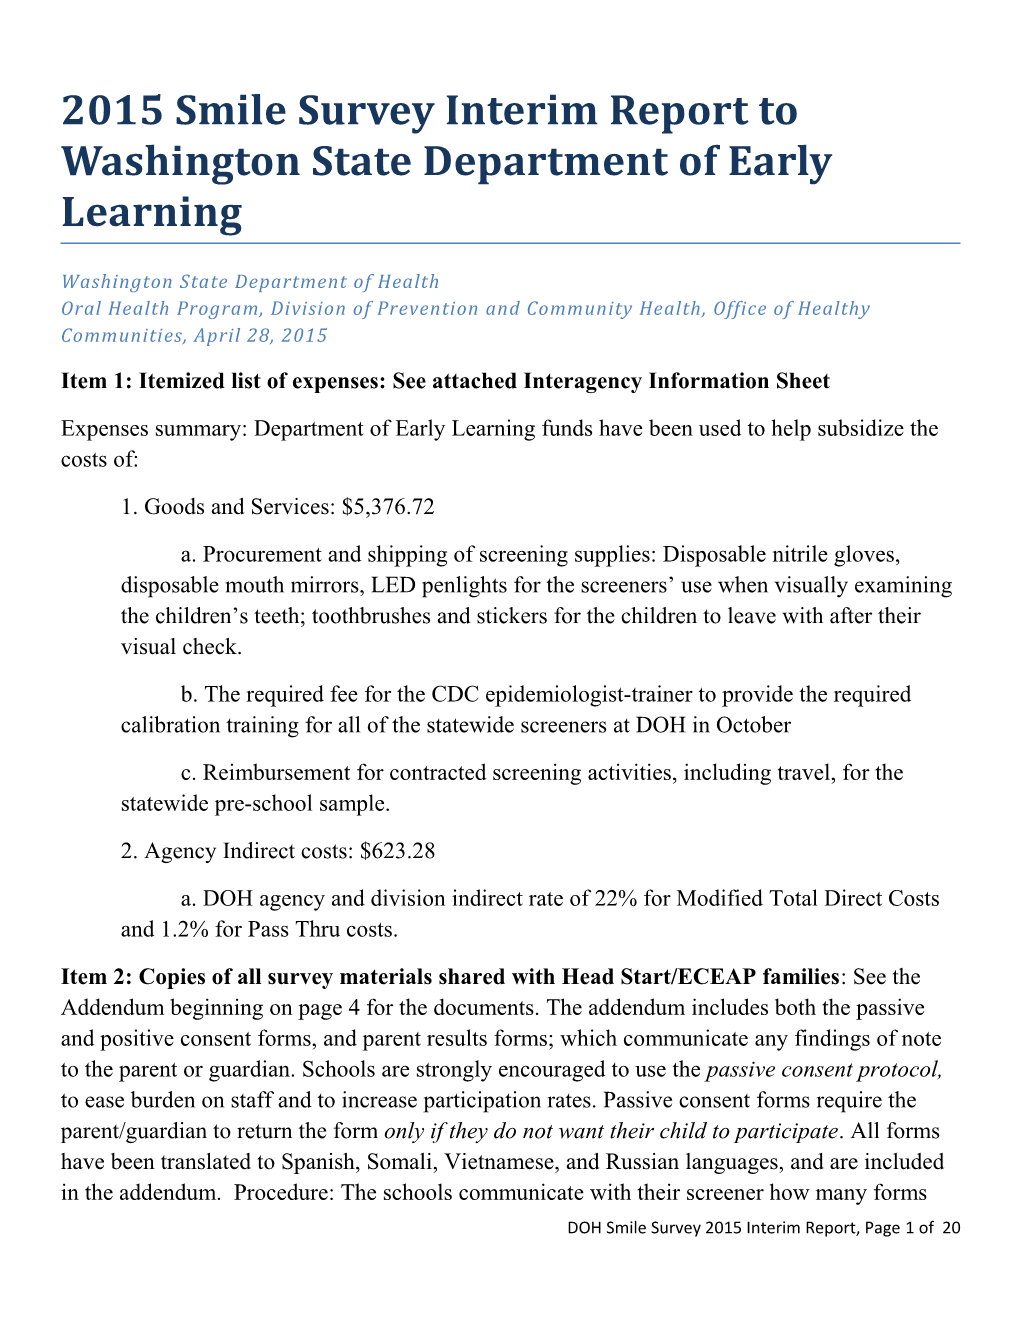 2015 Smile Survey Interim Report to Washington State Department of Early Learning